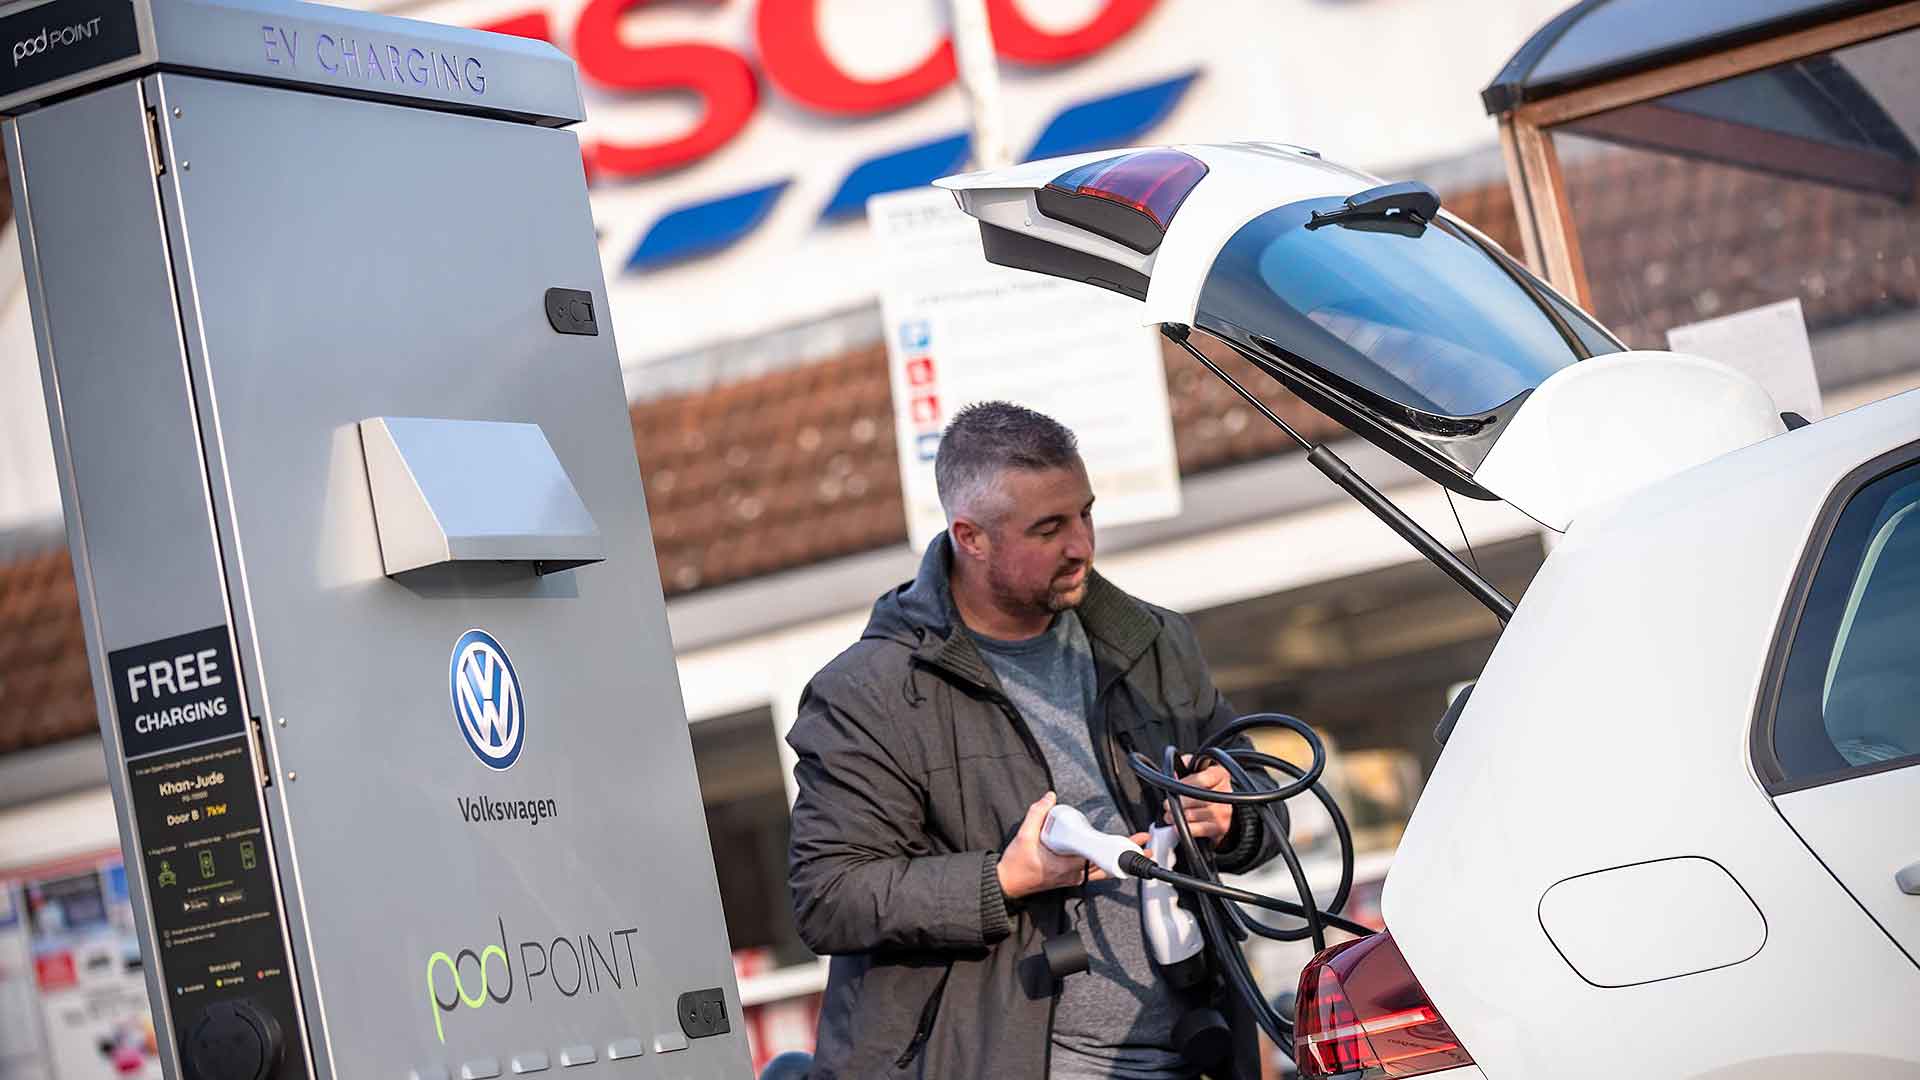 Volkswagen and Tesco chargepoint partnership